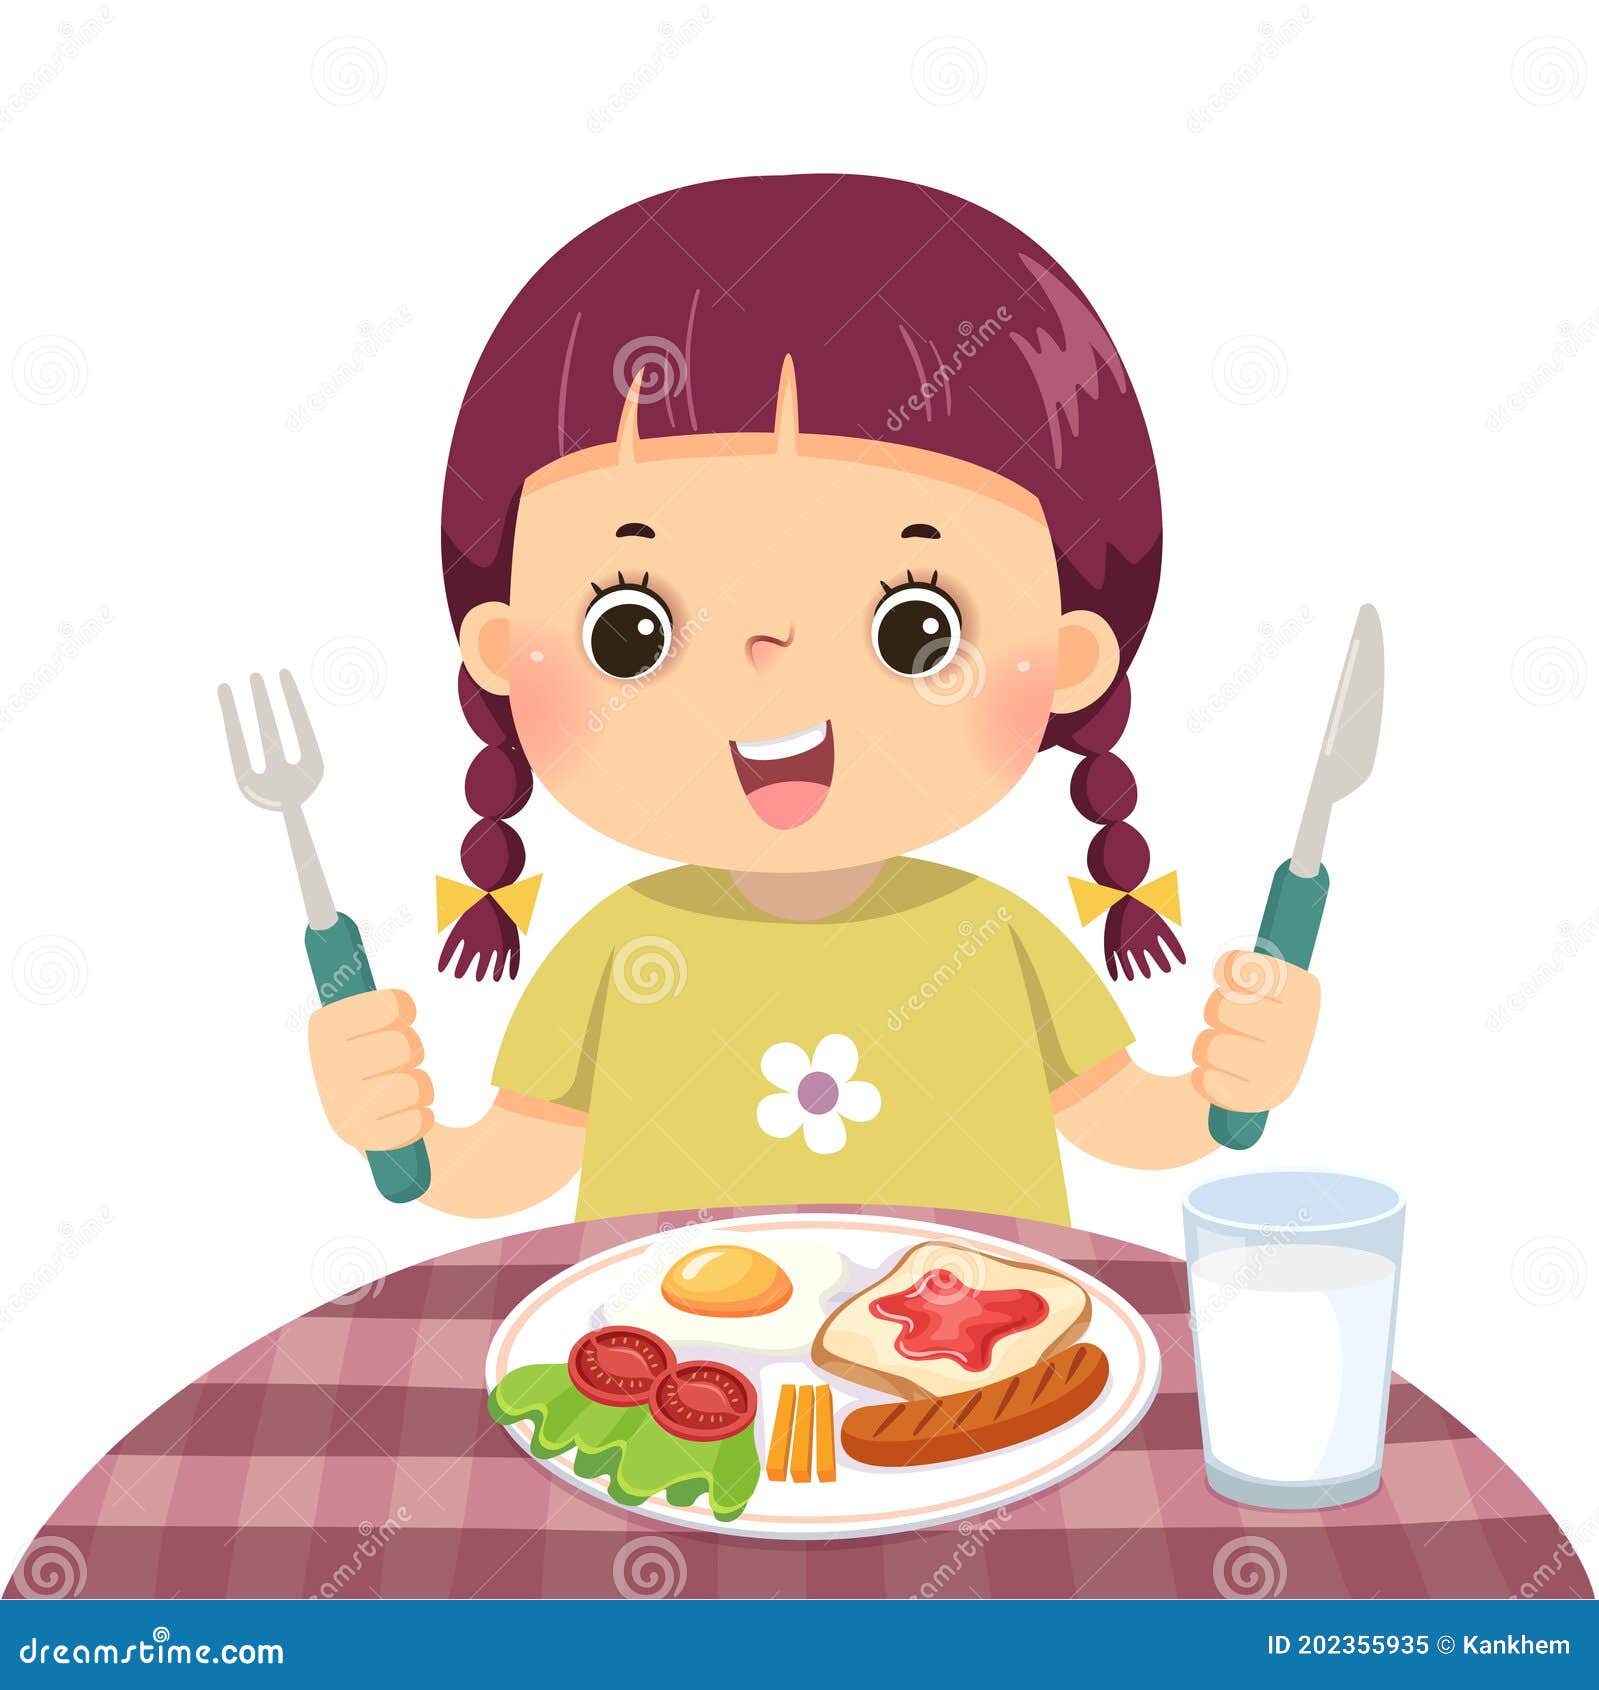 Cartoon of a Little Girl Eating Breakfast Stock Vector - Illustration of  lifestyle, happy: 202355935